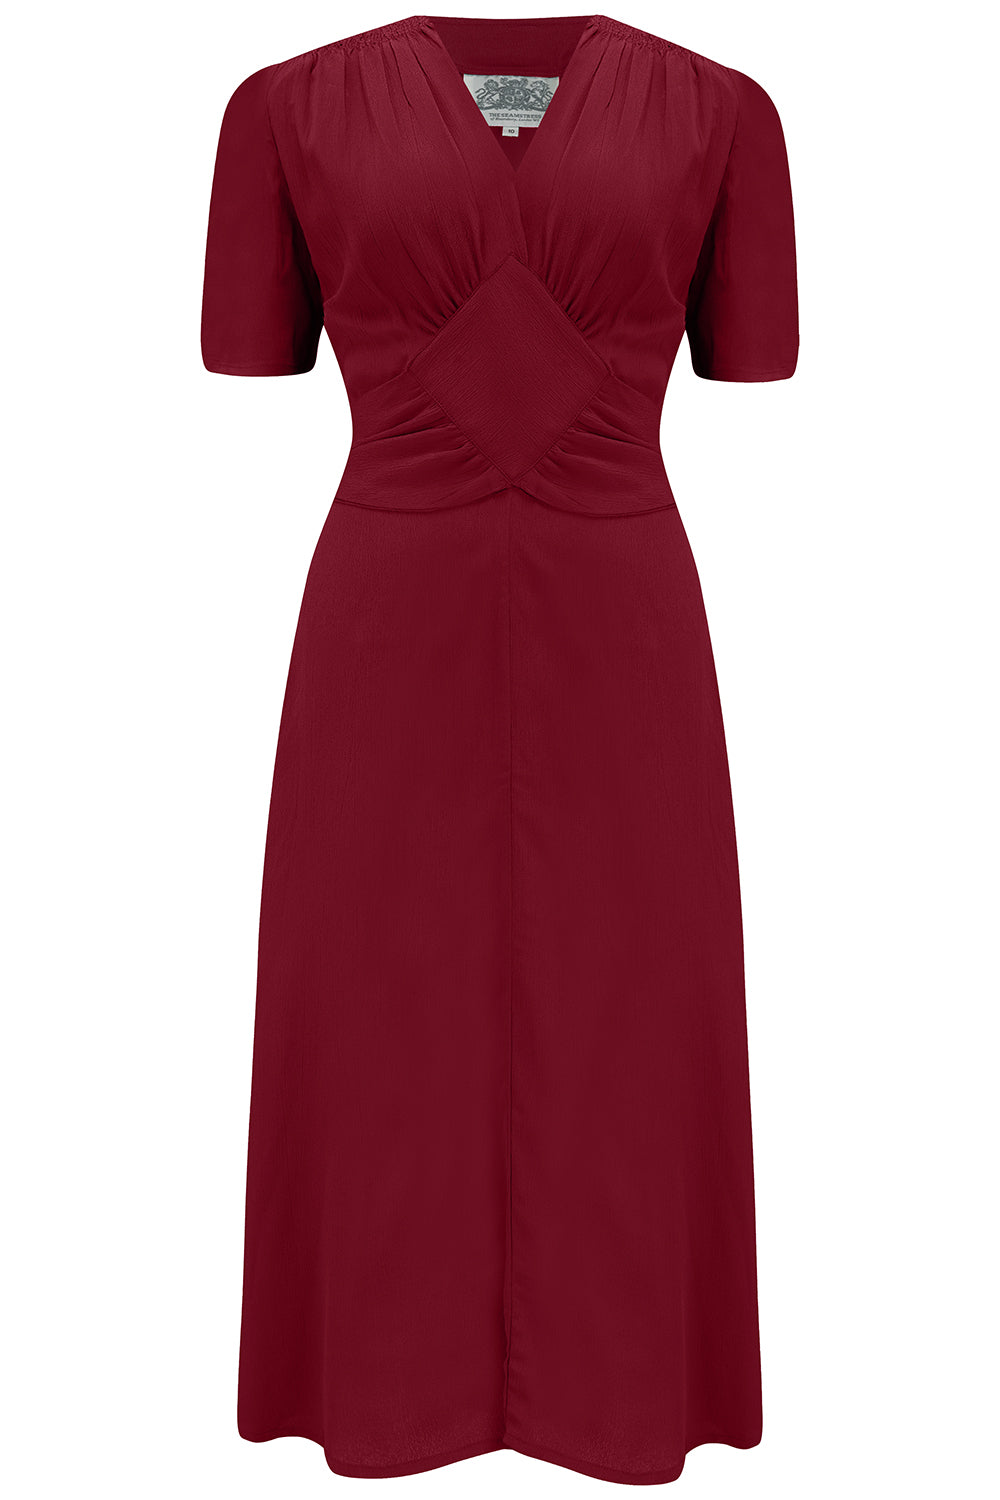 Ruby Dress in Windsor Wine, A Classic & Authentic 1940s Vintage Inspired Style By The Seamstress Of Bloomsbury